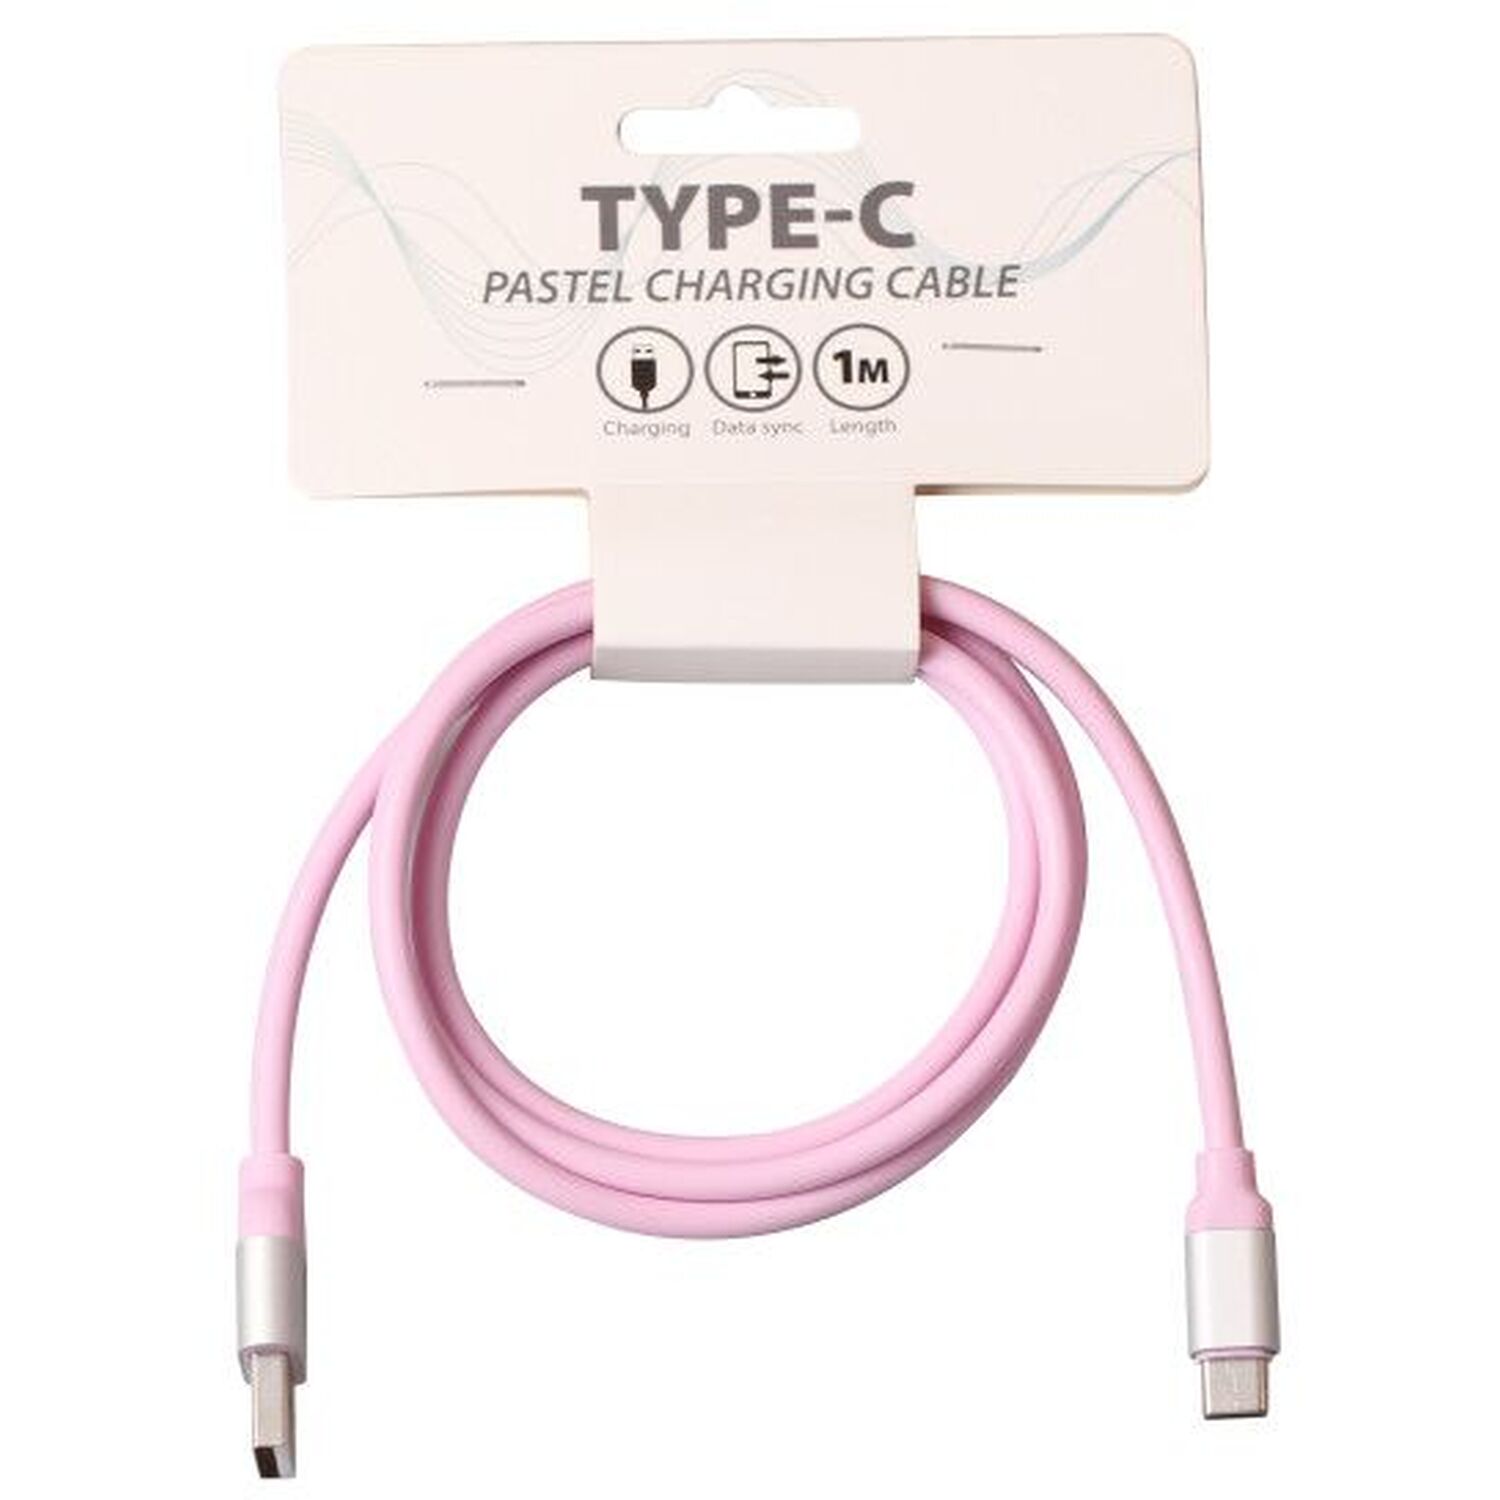 Type-C Pastel Charging Cable Image 2